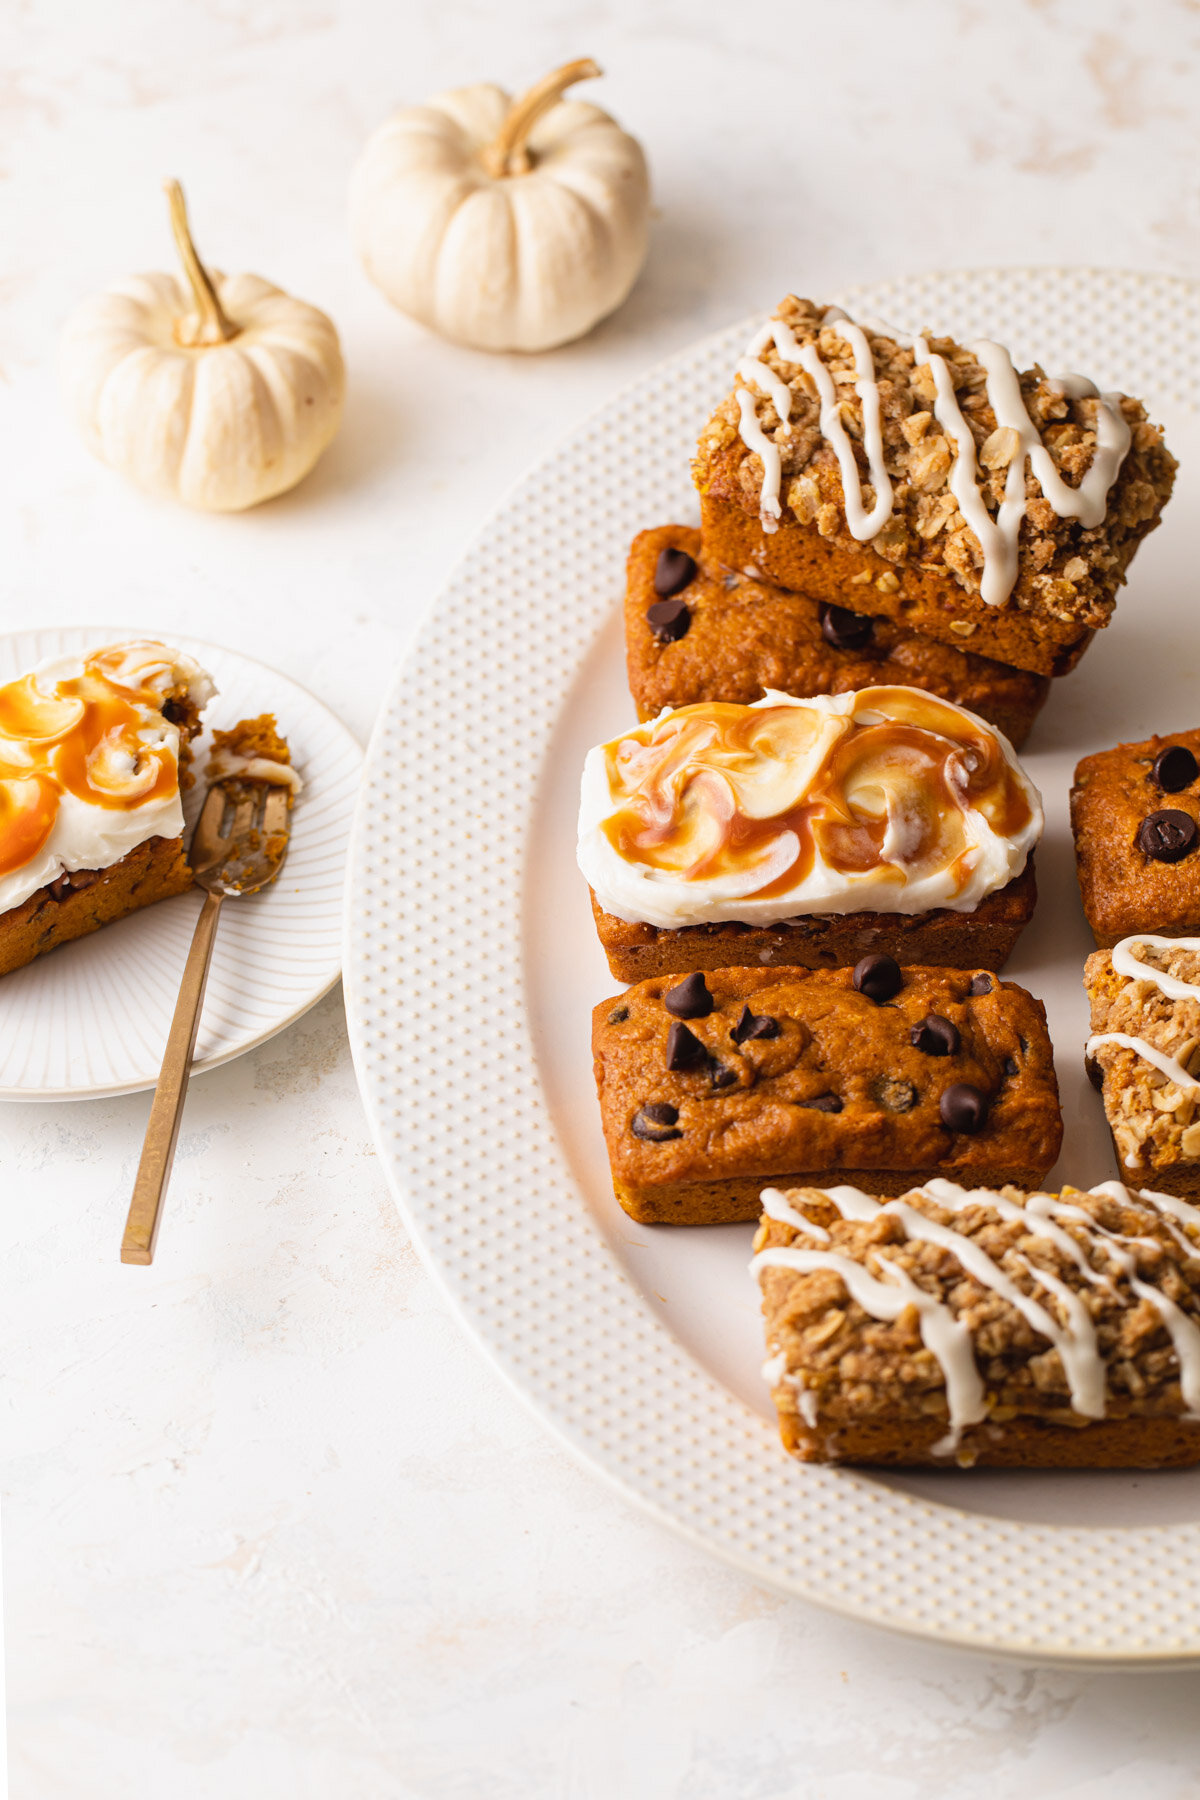 Pumpkin mini loaf cakes on a platter with chocolate chips, vanilla glaze, and caramel cream cheese swirl.